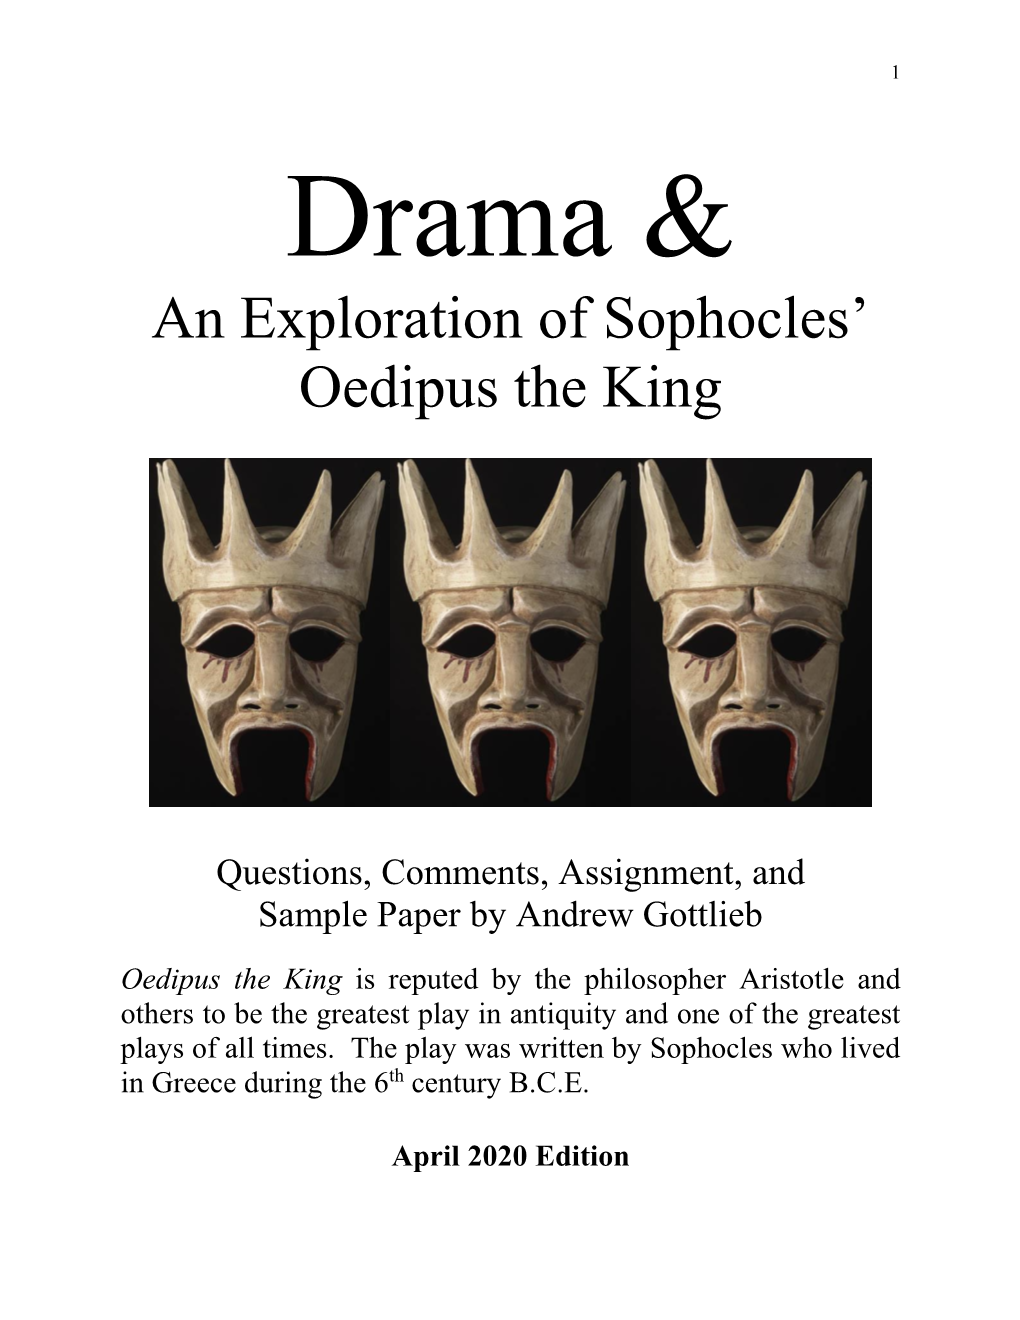 An Exploration of Sophocles' Oedipus the King